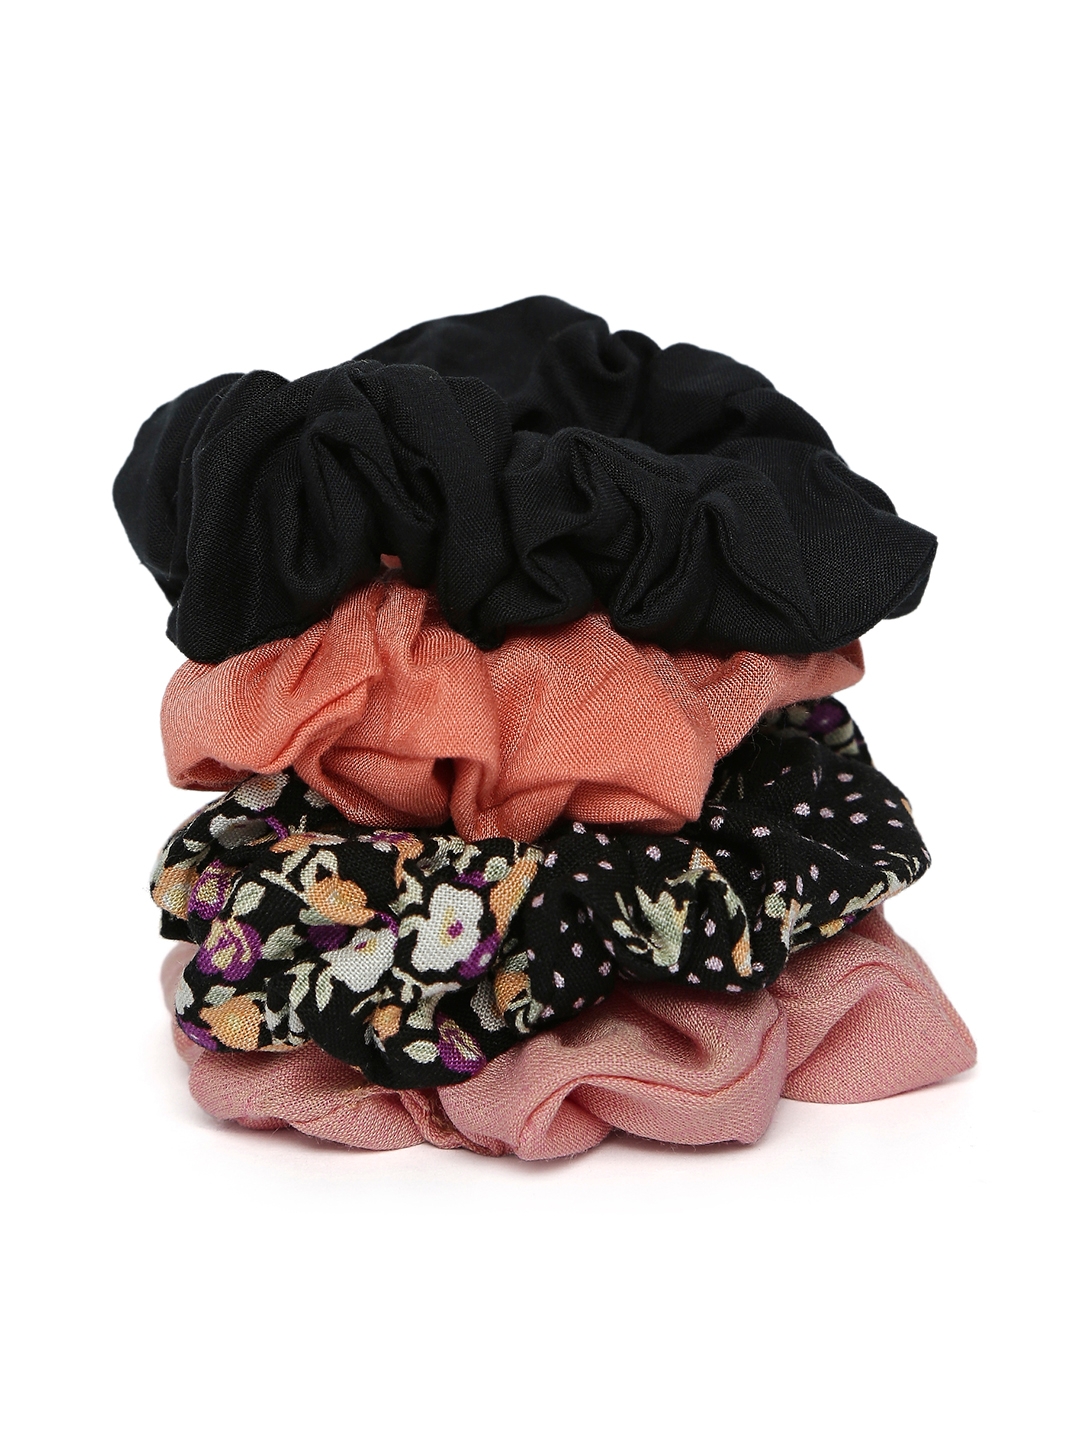 Lilly & sparkle | Lilly & Sparkle Peach And Black Combo Scrunchies Set Of 4